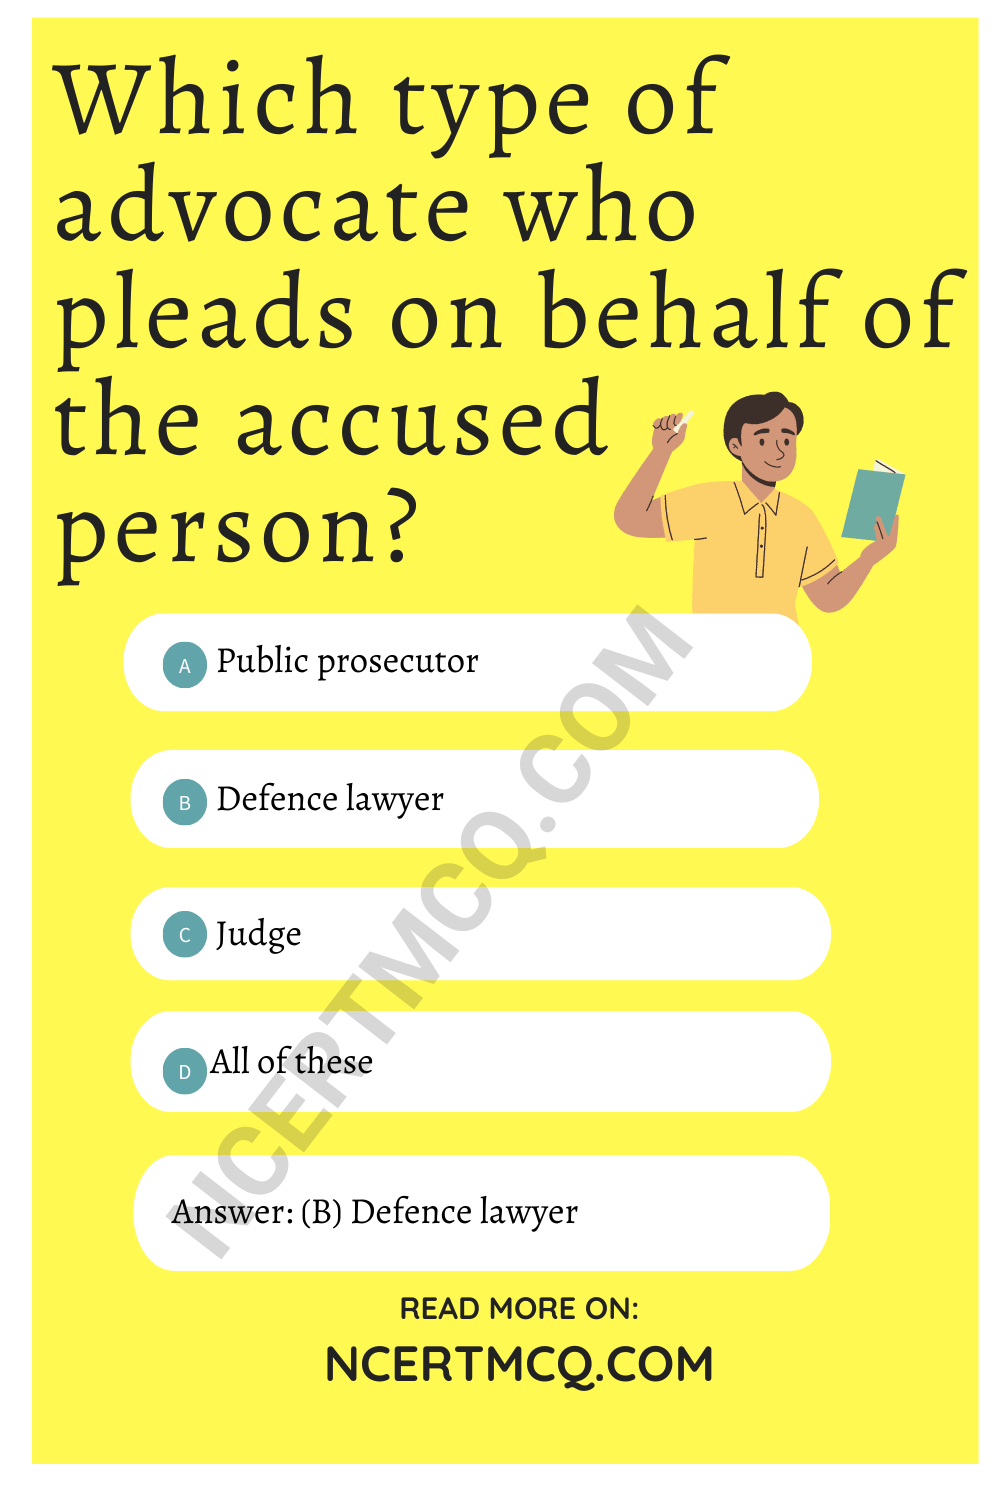 Which type of advocate who pleads on behalf of the accused person?